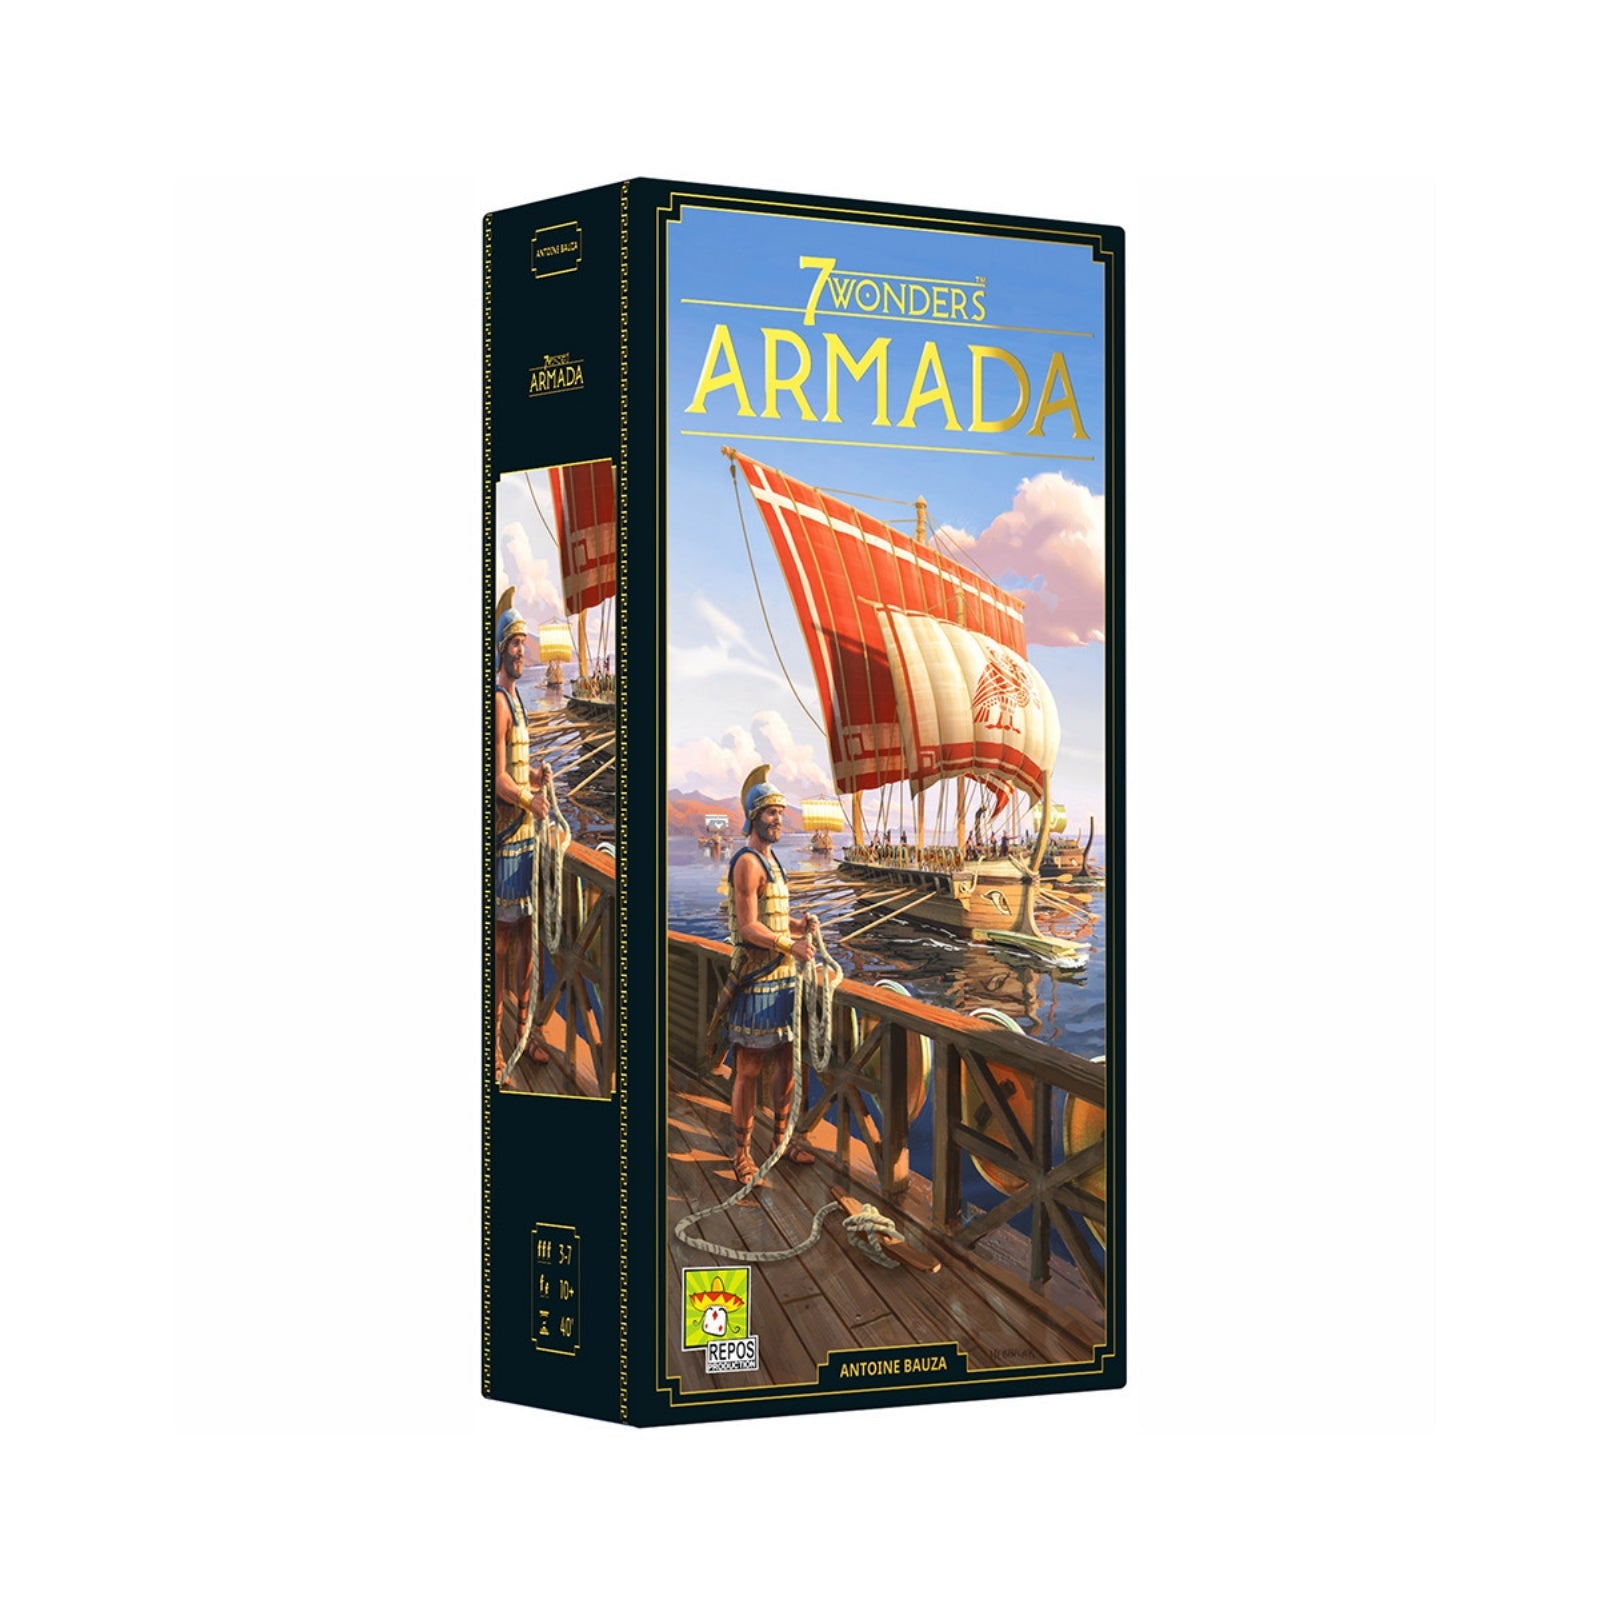 7 Wonders New 2nd Edition Armada Board Game Expansion